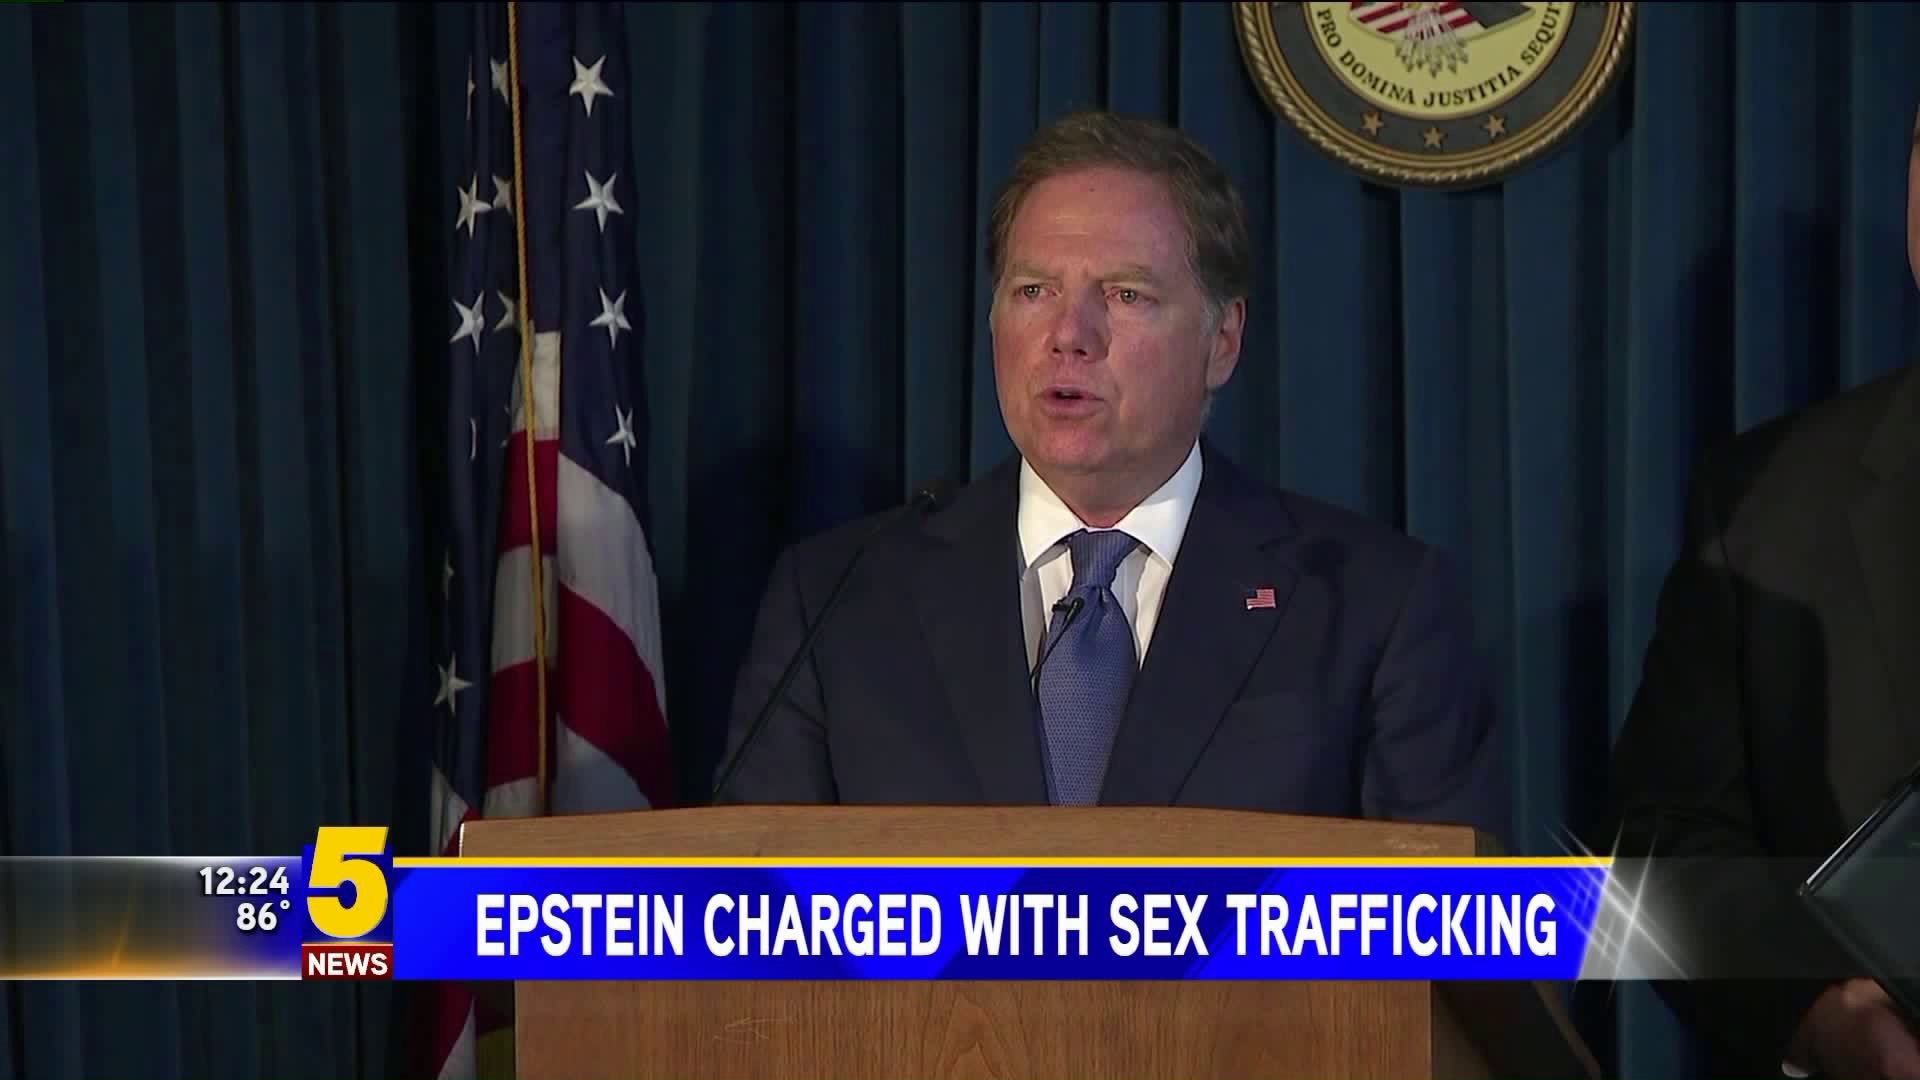 Jeffrey Epstein Charged With Sex Trafficking